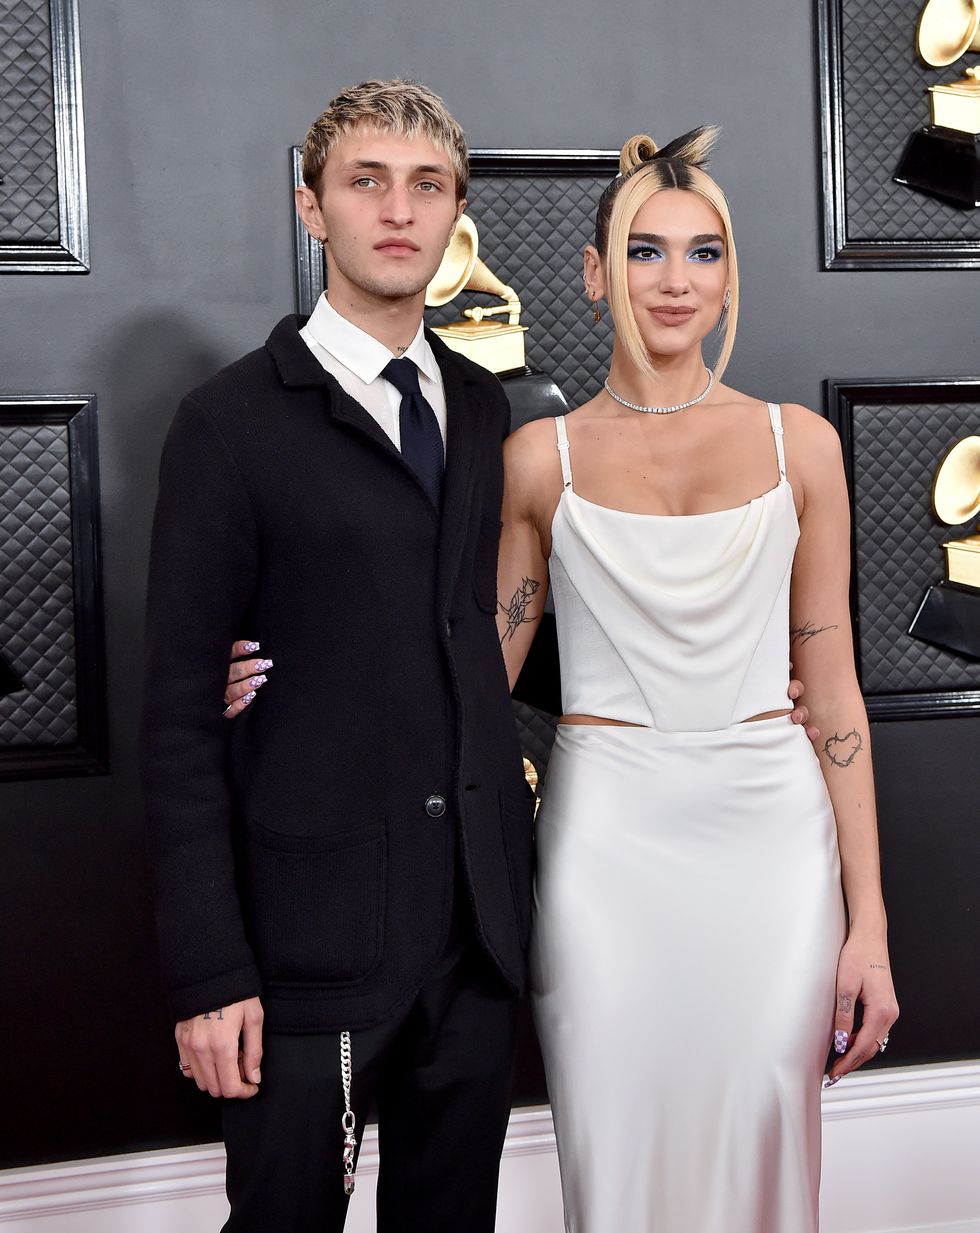 los angeles, california january 26 anwar hadid and dua lipa attend the 62nd annual grammy awards at staples center on january 26, 2020 in los angeles, california photo by axellebauer griffinfilmmagic